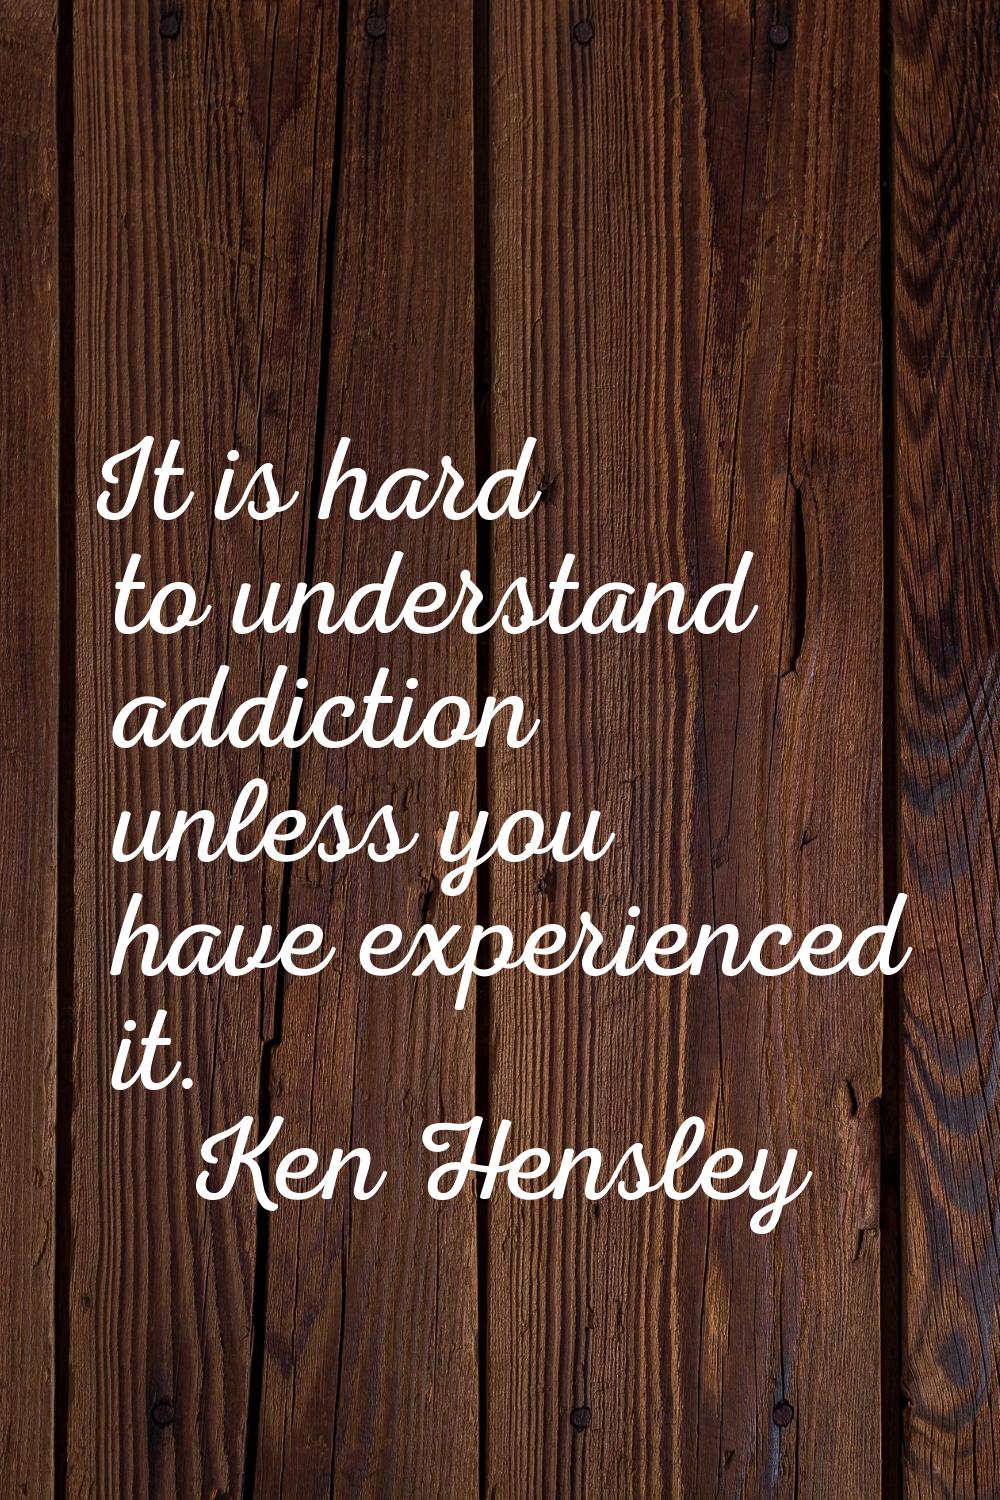 It is hard to understand addiction unless you have experienced it.